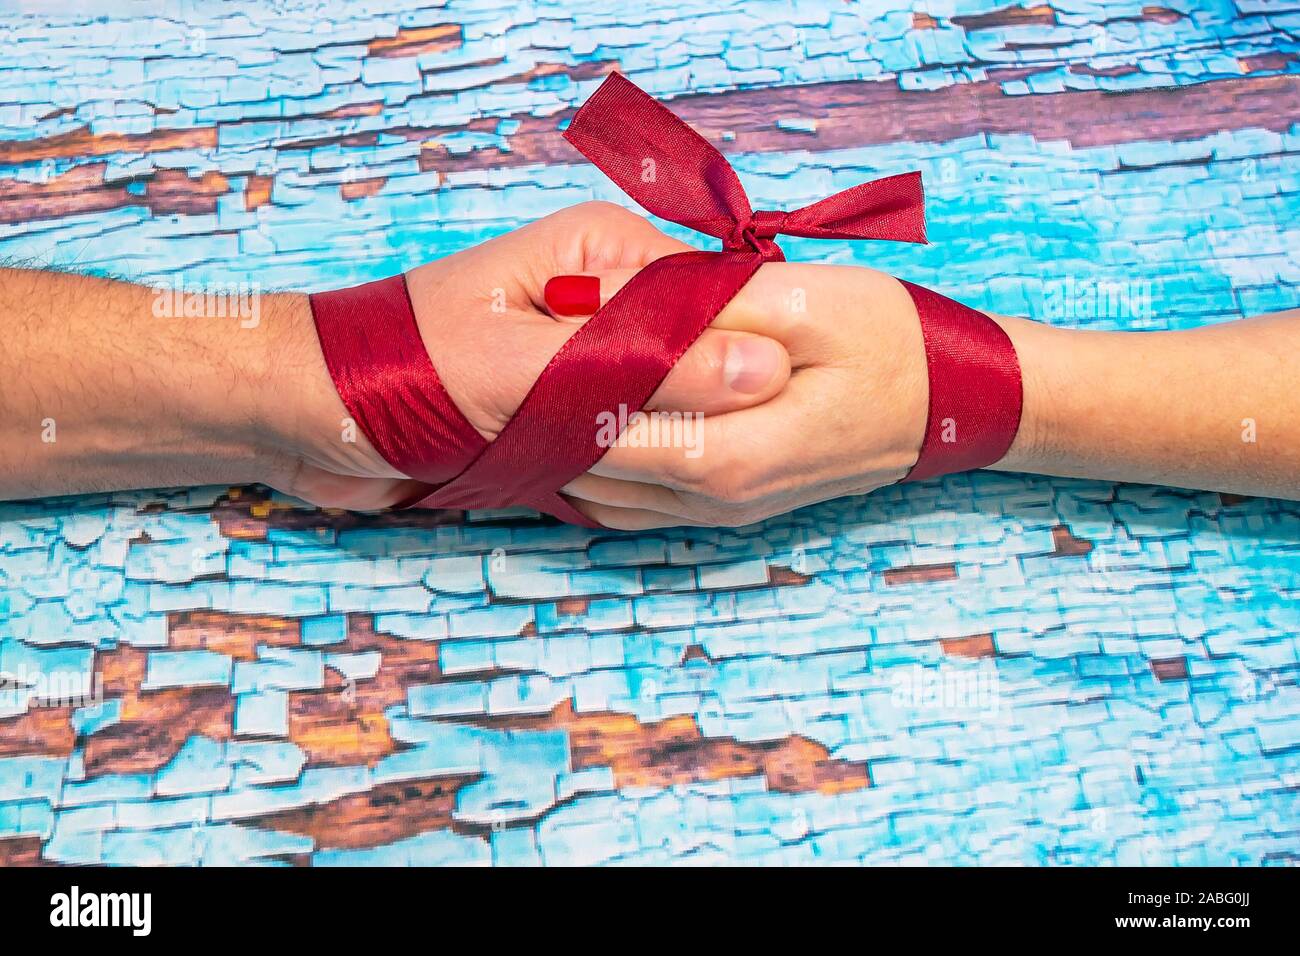 A red ribbon binds two hands, one of a woman and the other of a man on a blue and brown background Stock Photo